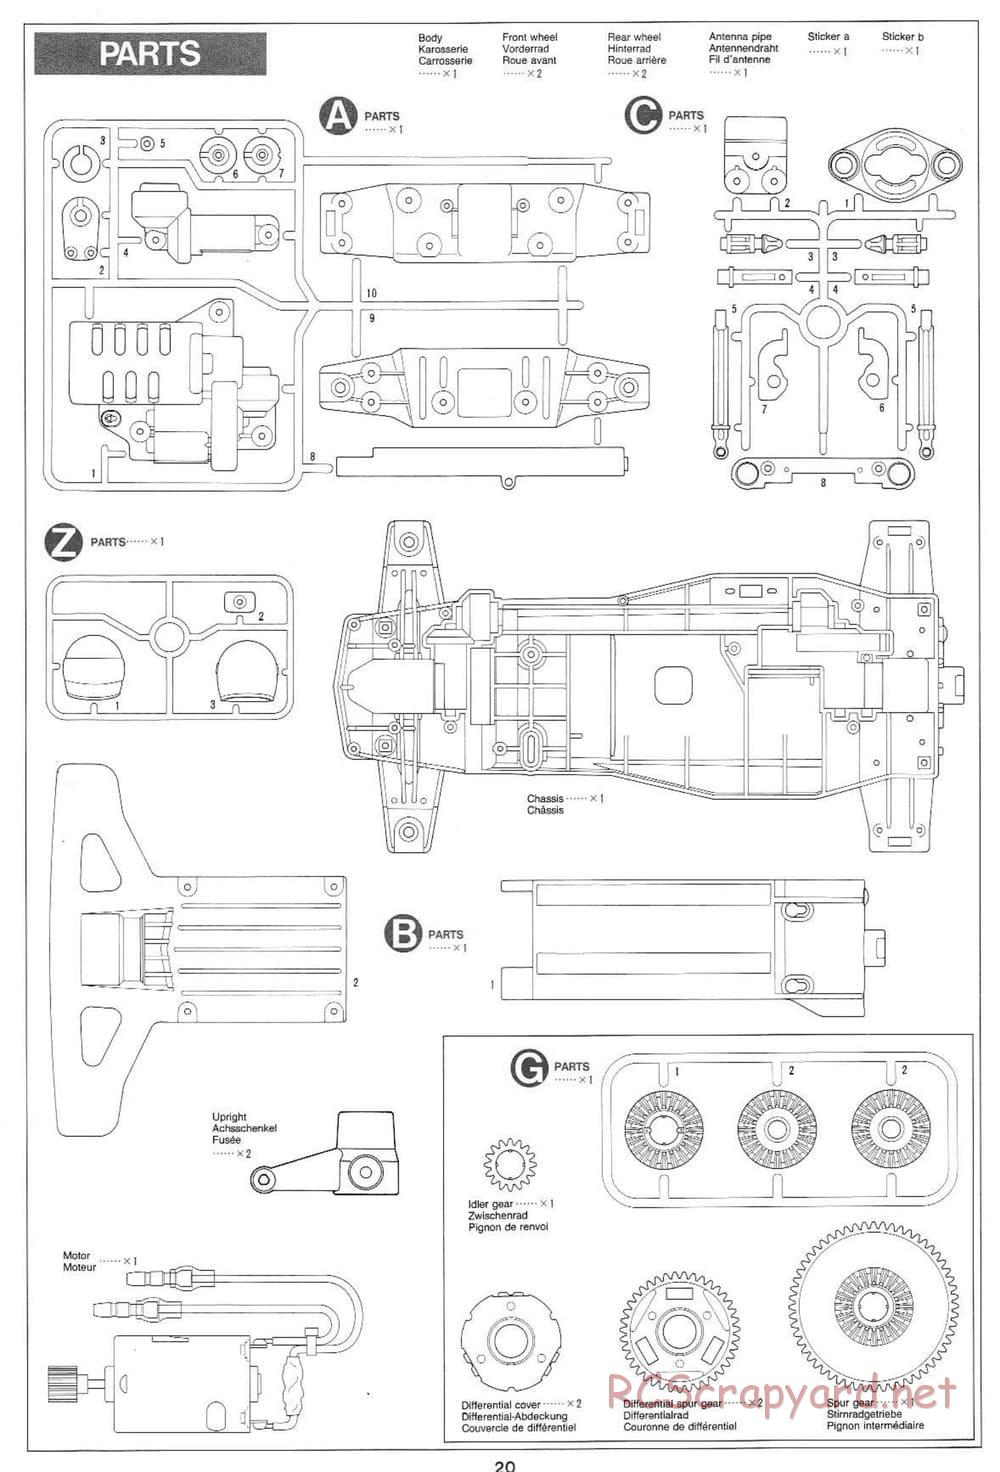 Tamiya - Voltec Fighter - Boy's 4WD Chassis - Manual - Page 20